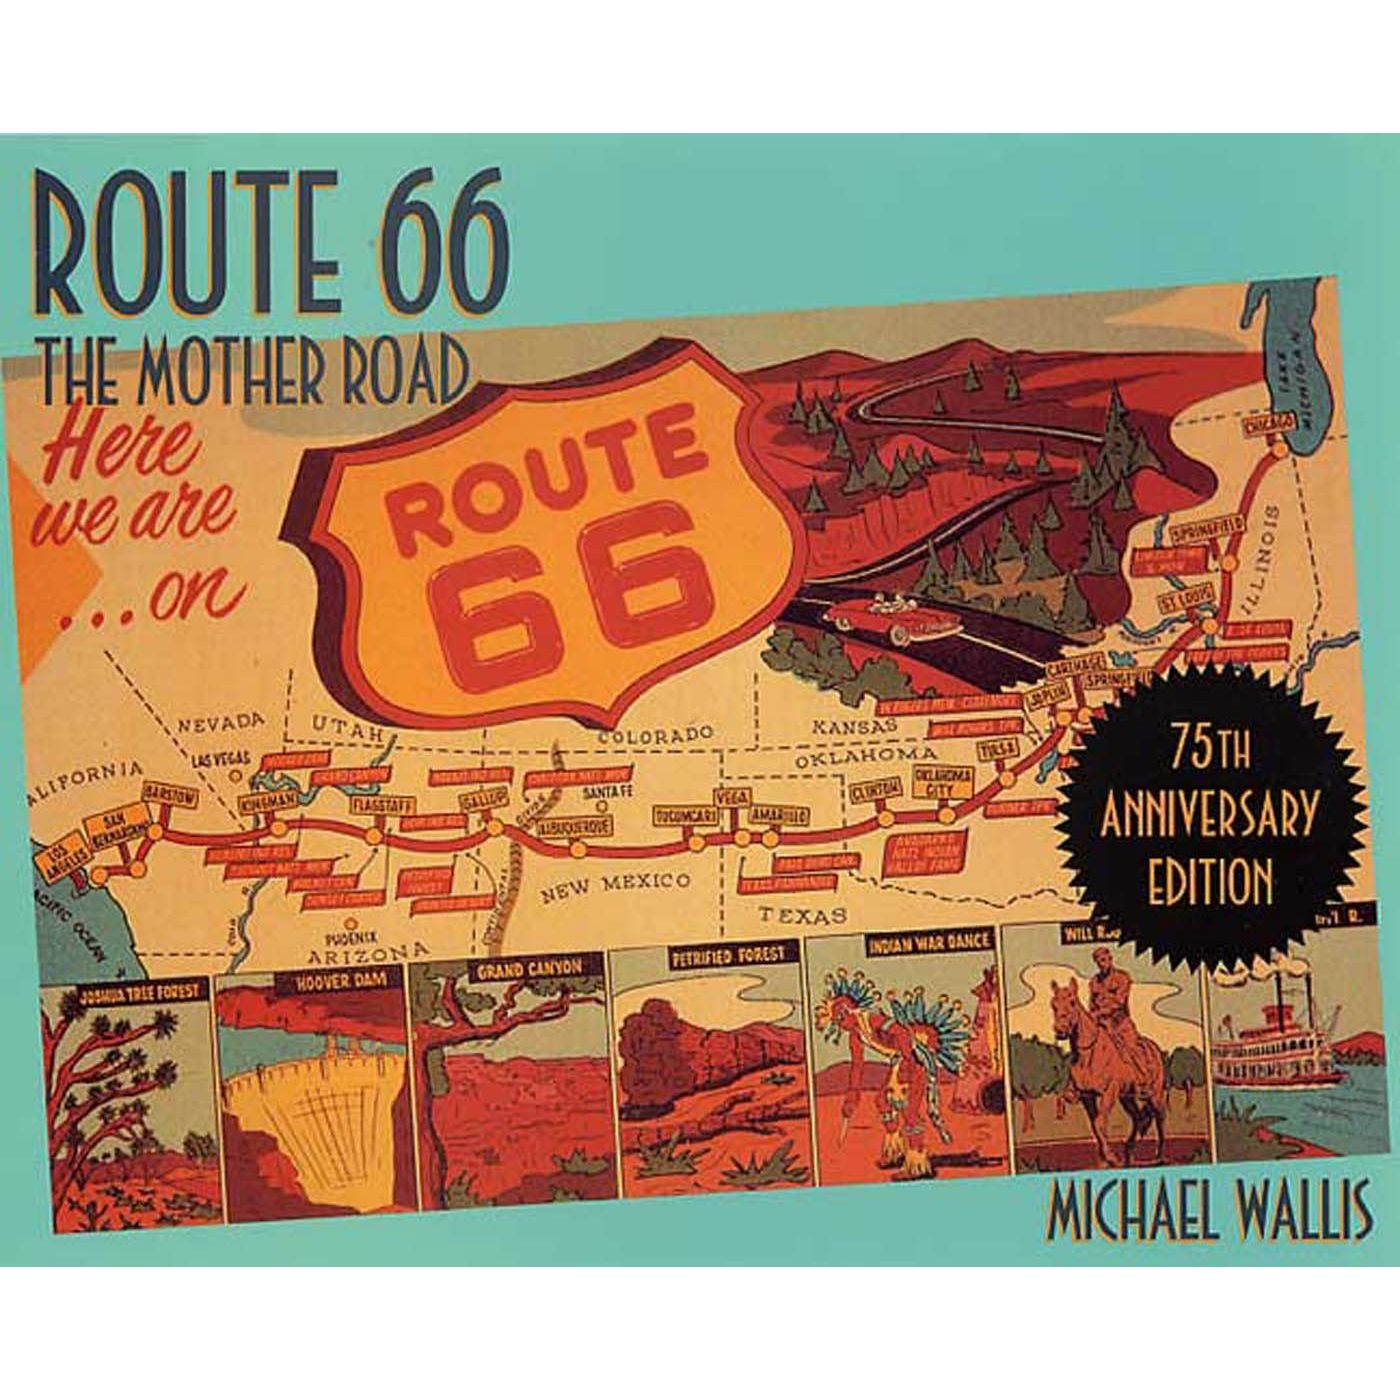 Route 66: The Mother Road by Michael Wallis